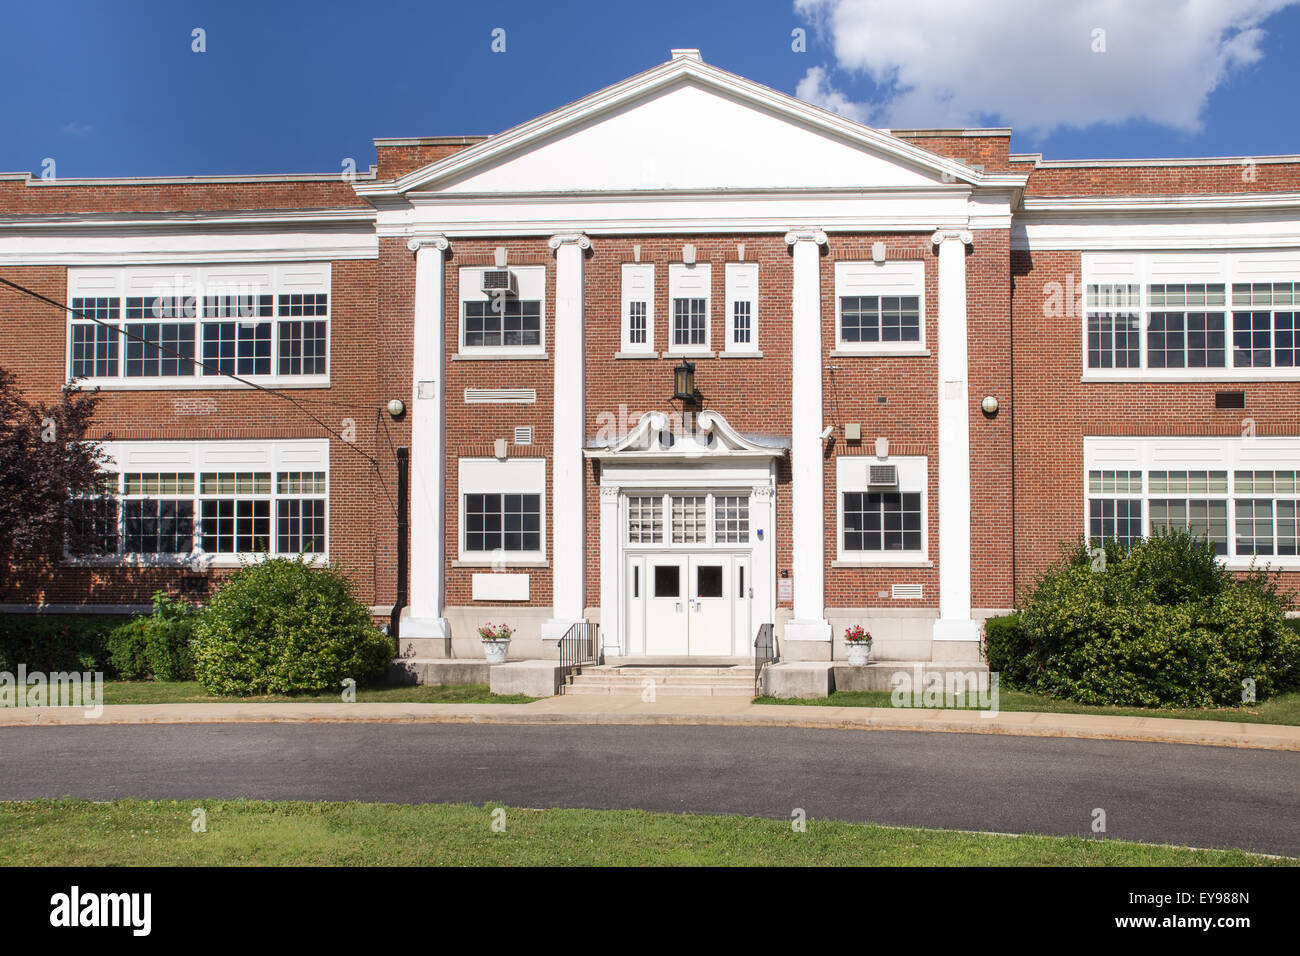 Typical American elementary school building on a sunny day Stock Photo